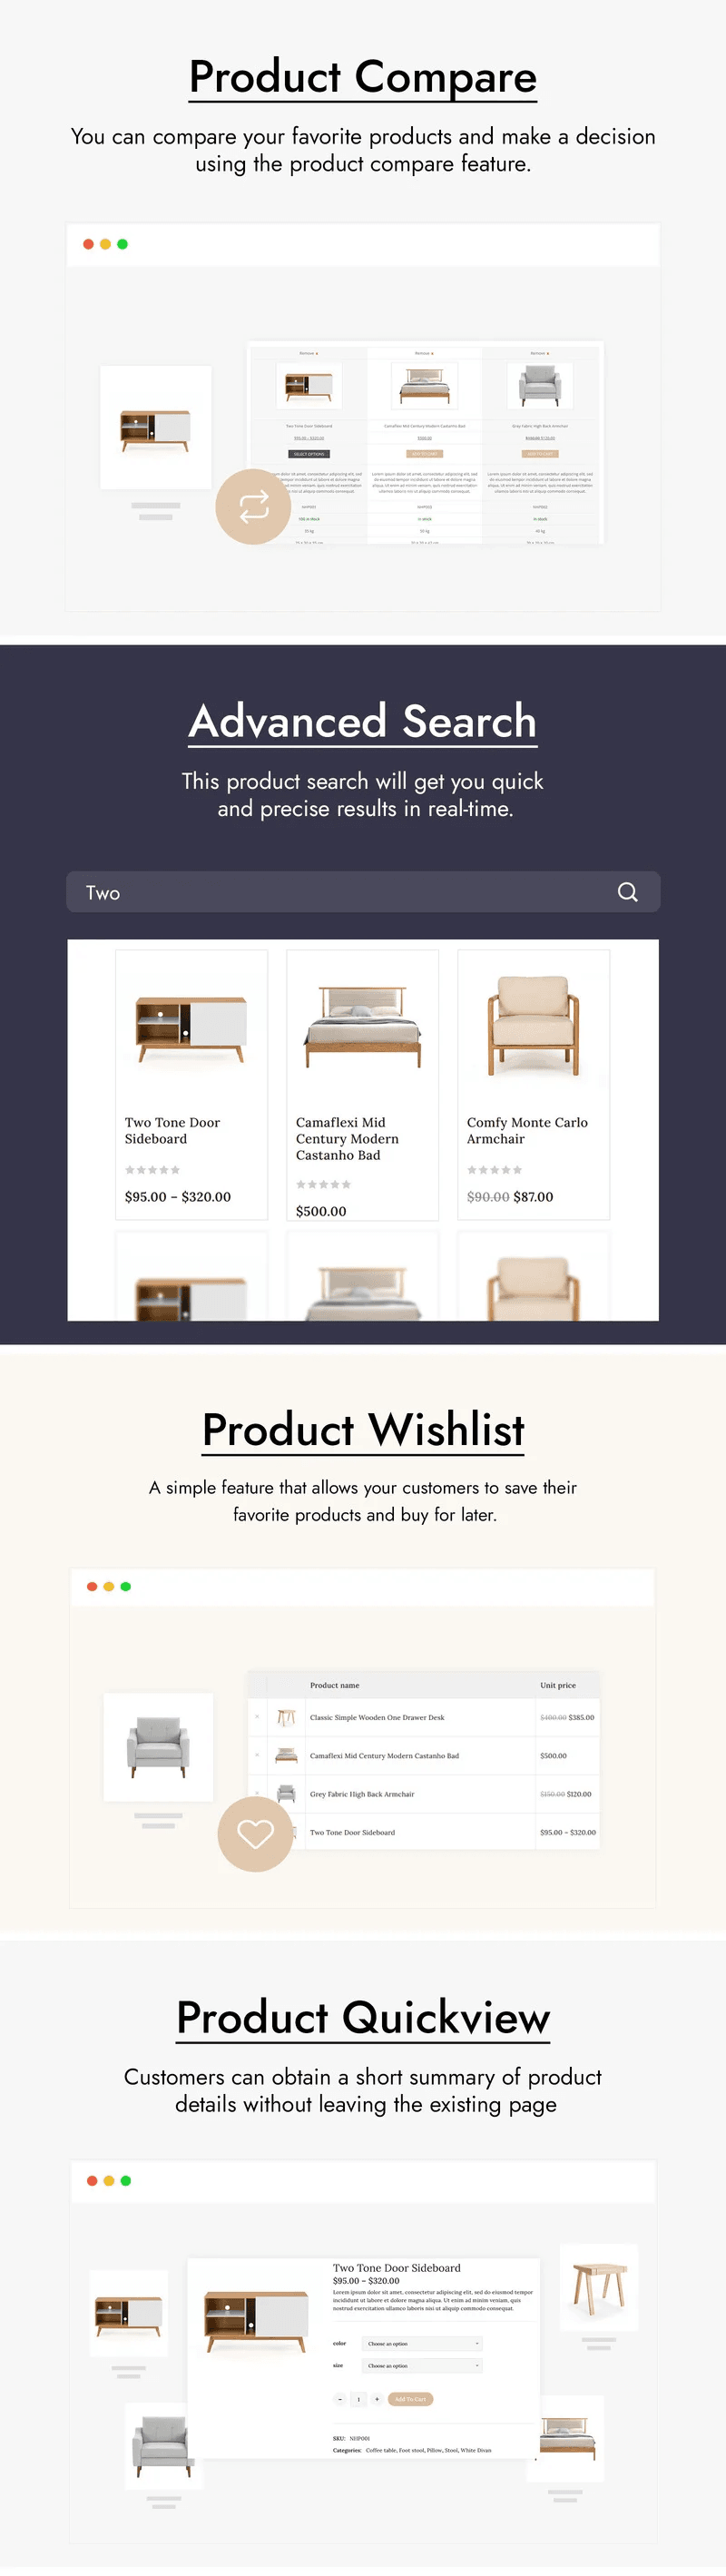 Store pages with beds.